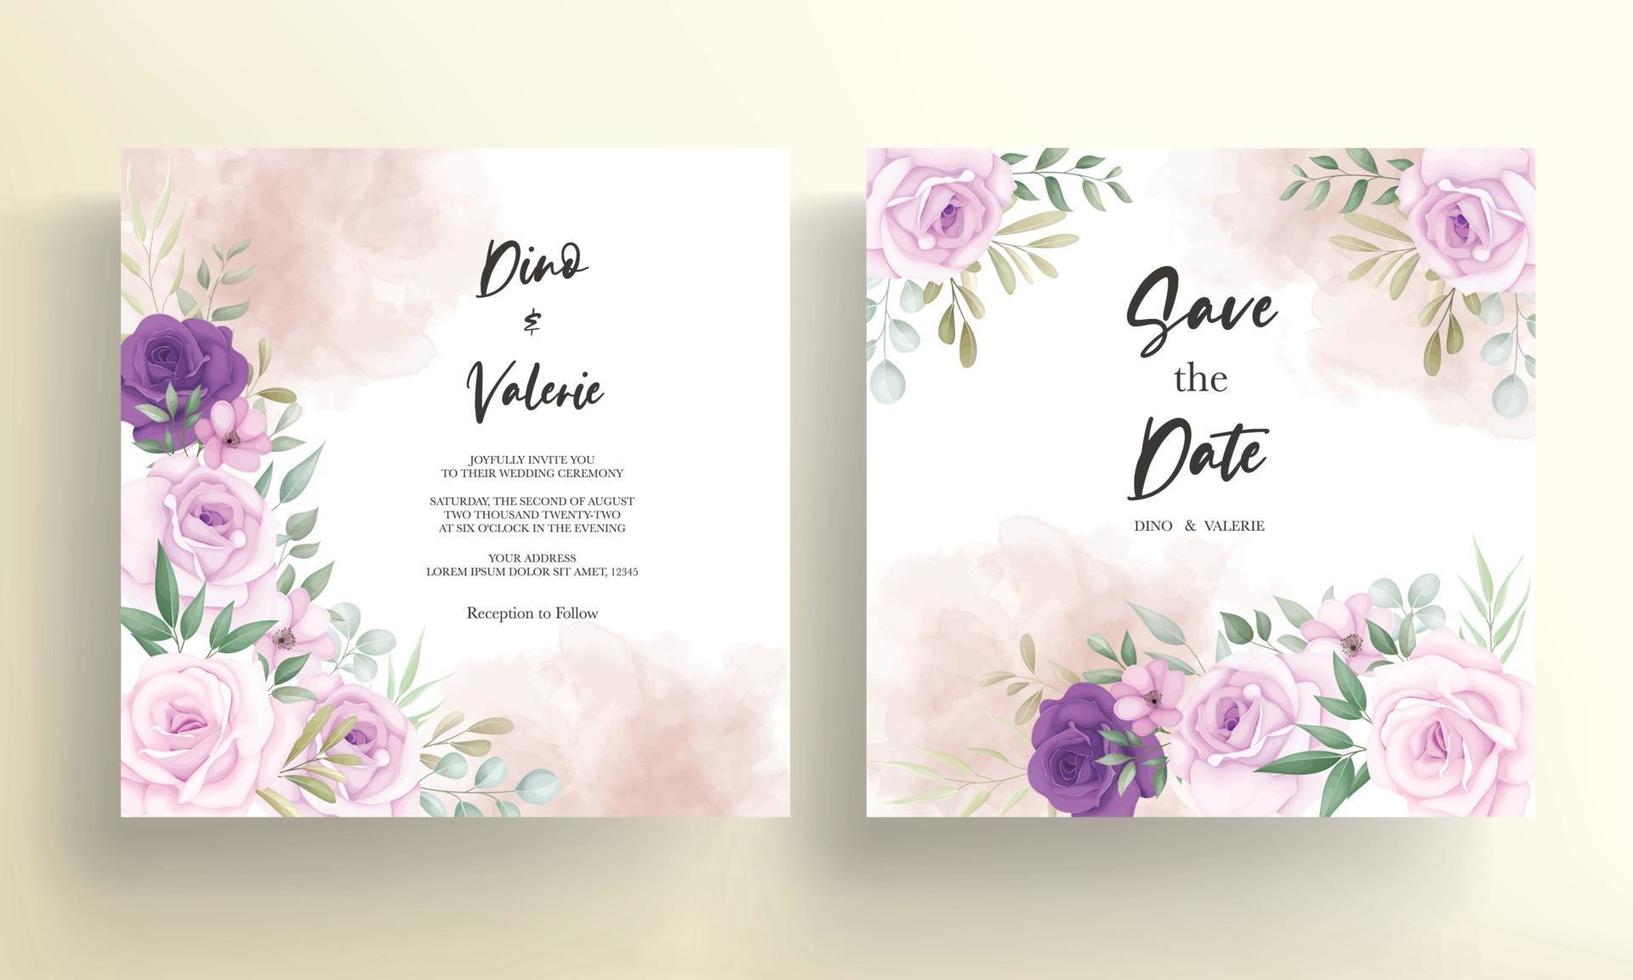 Elegant wedding invitation card with beautiful floral decorations vector